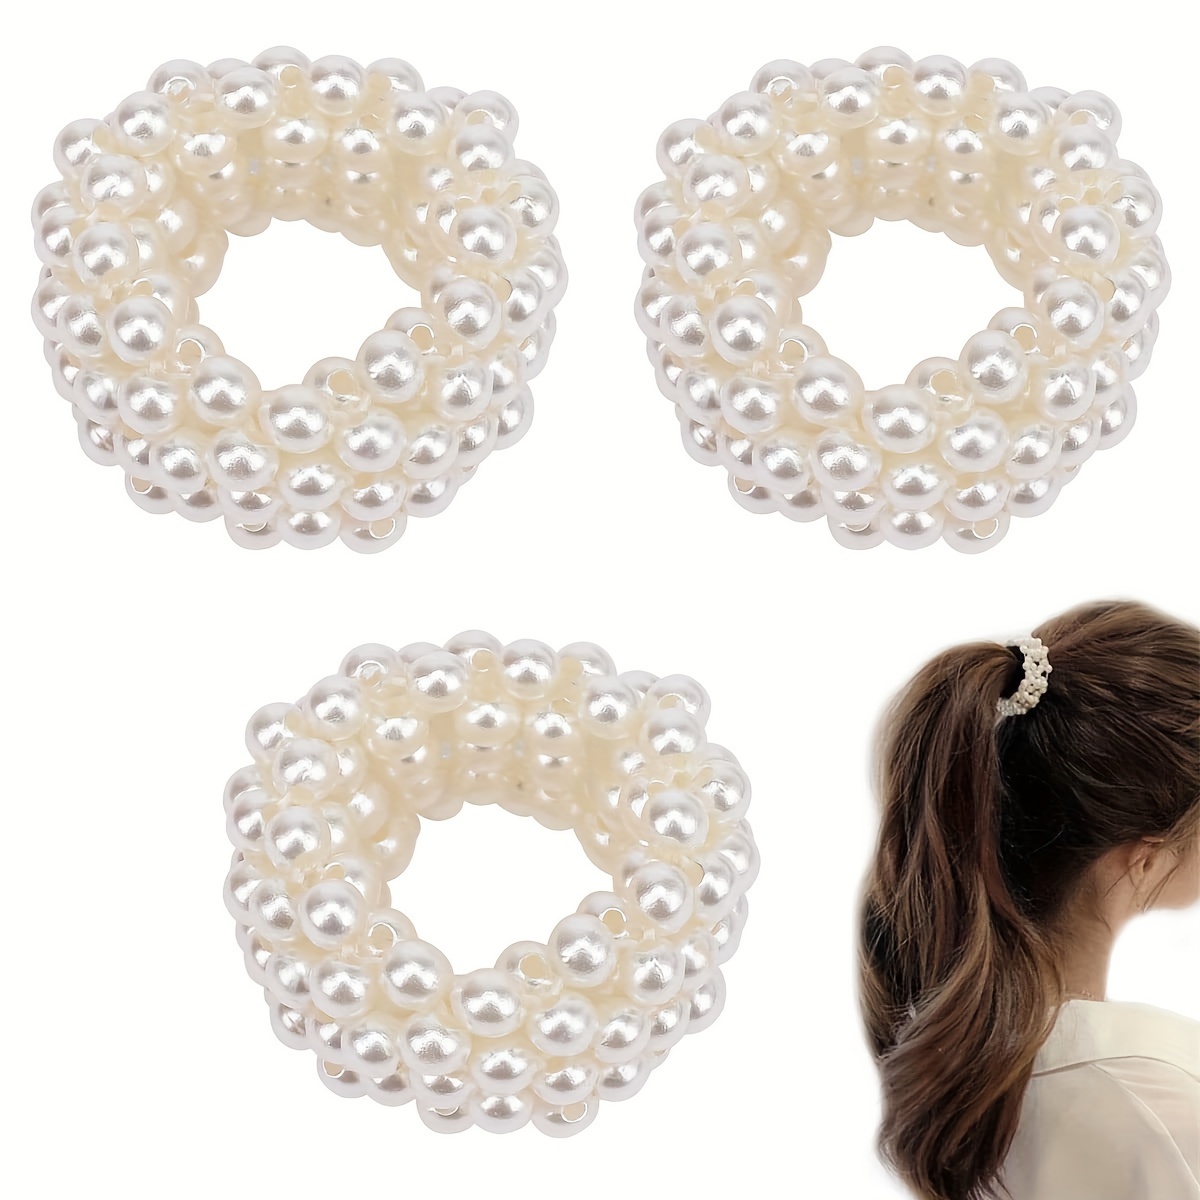 

3pcs Elegant Faux Pearl Decorative Hair Loops Elastic Hair Ties Non Slip Ponytail Holders For Women And Daily Use Wear